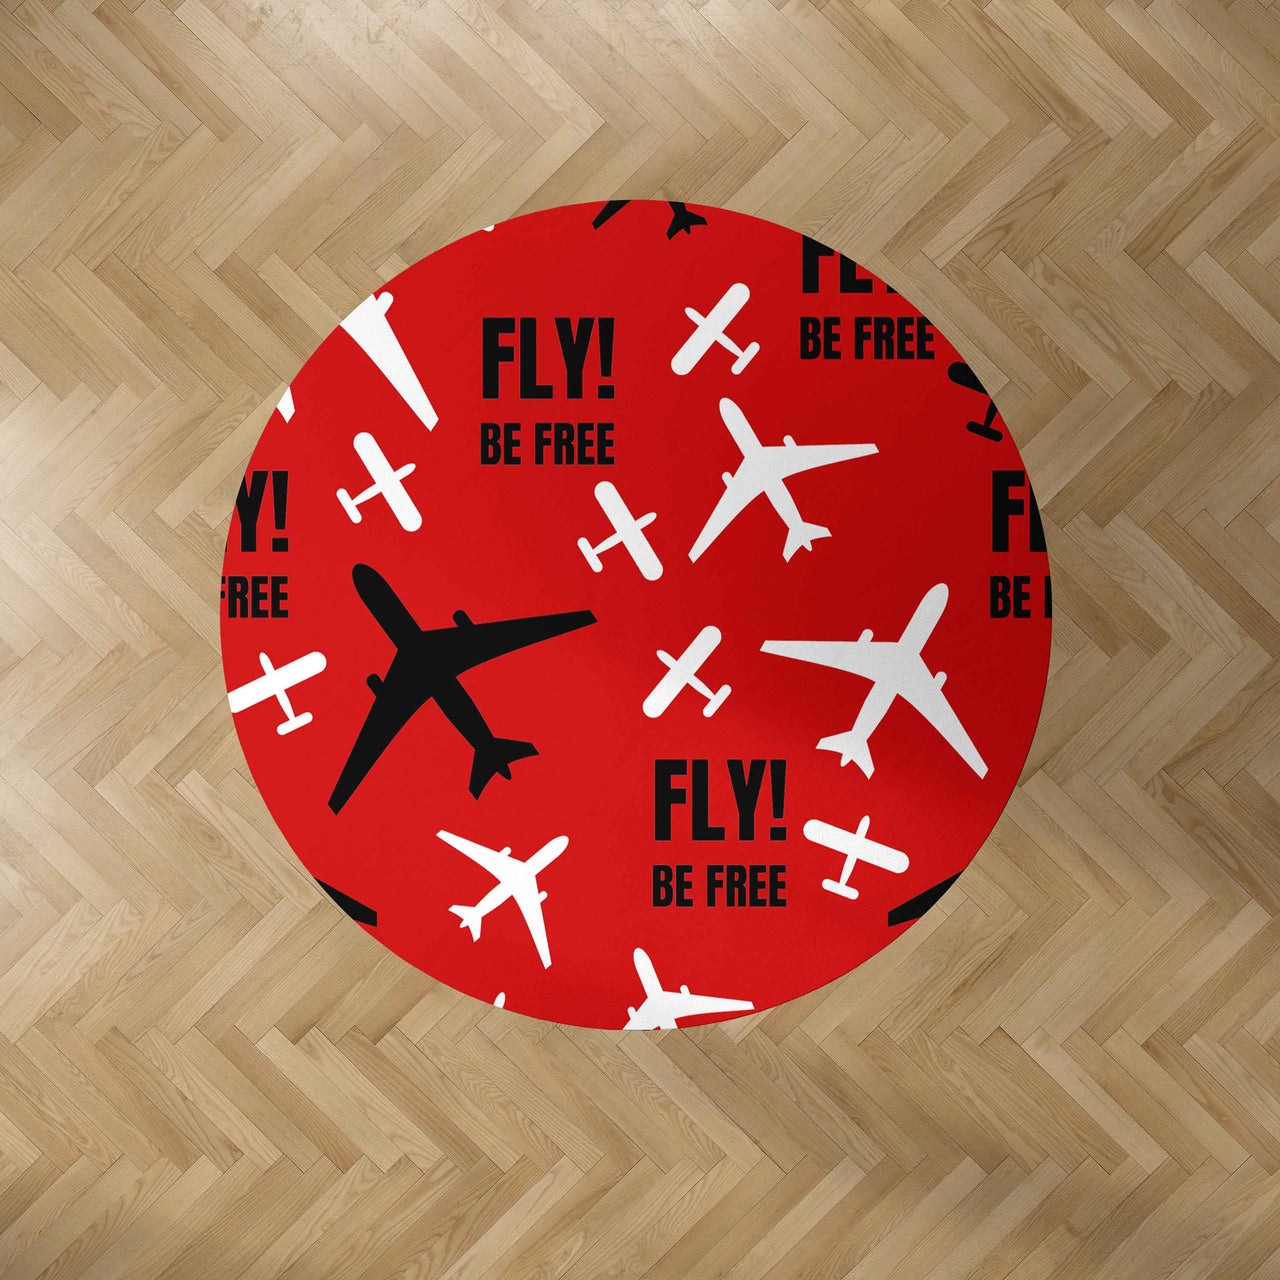 Fly Be Free Red Designed Carpet & Floor Mats (Round)